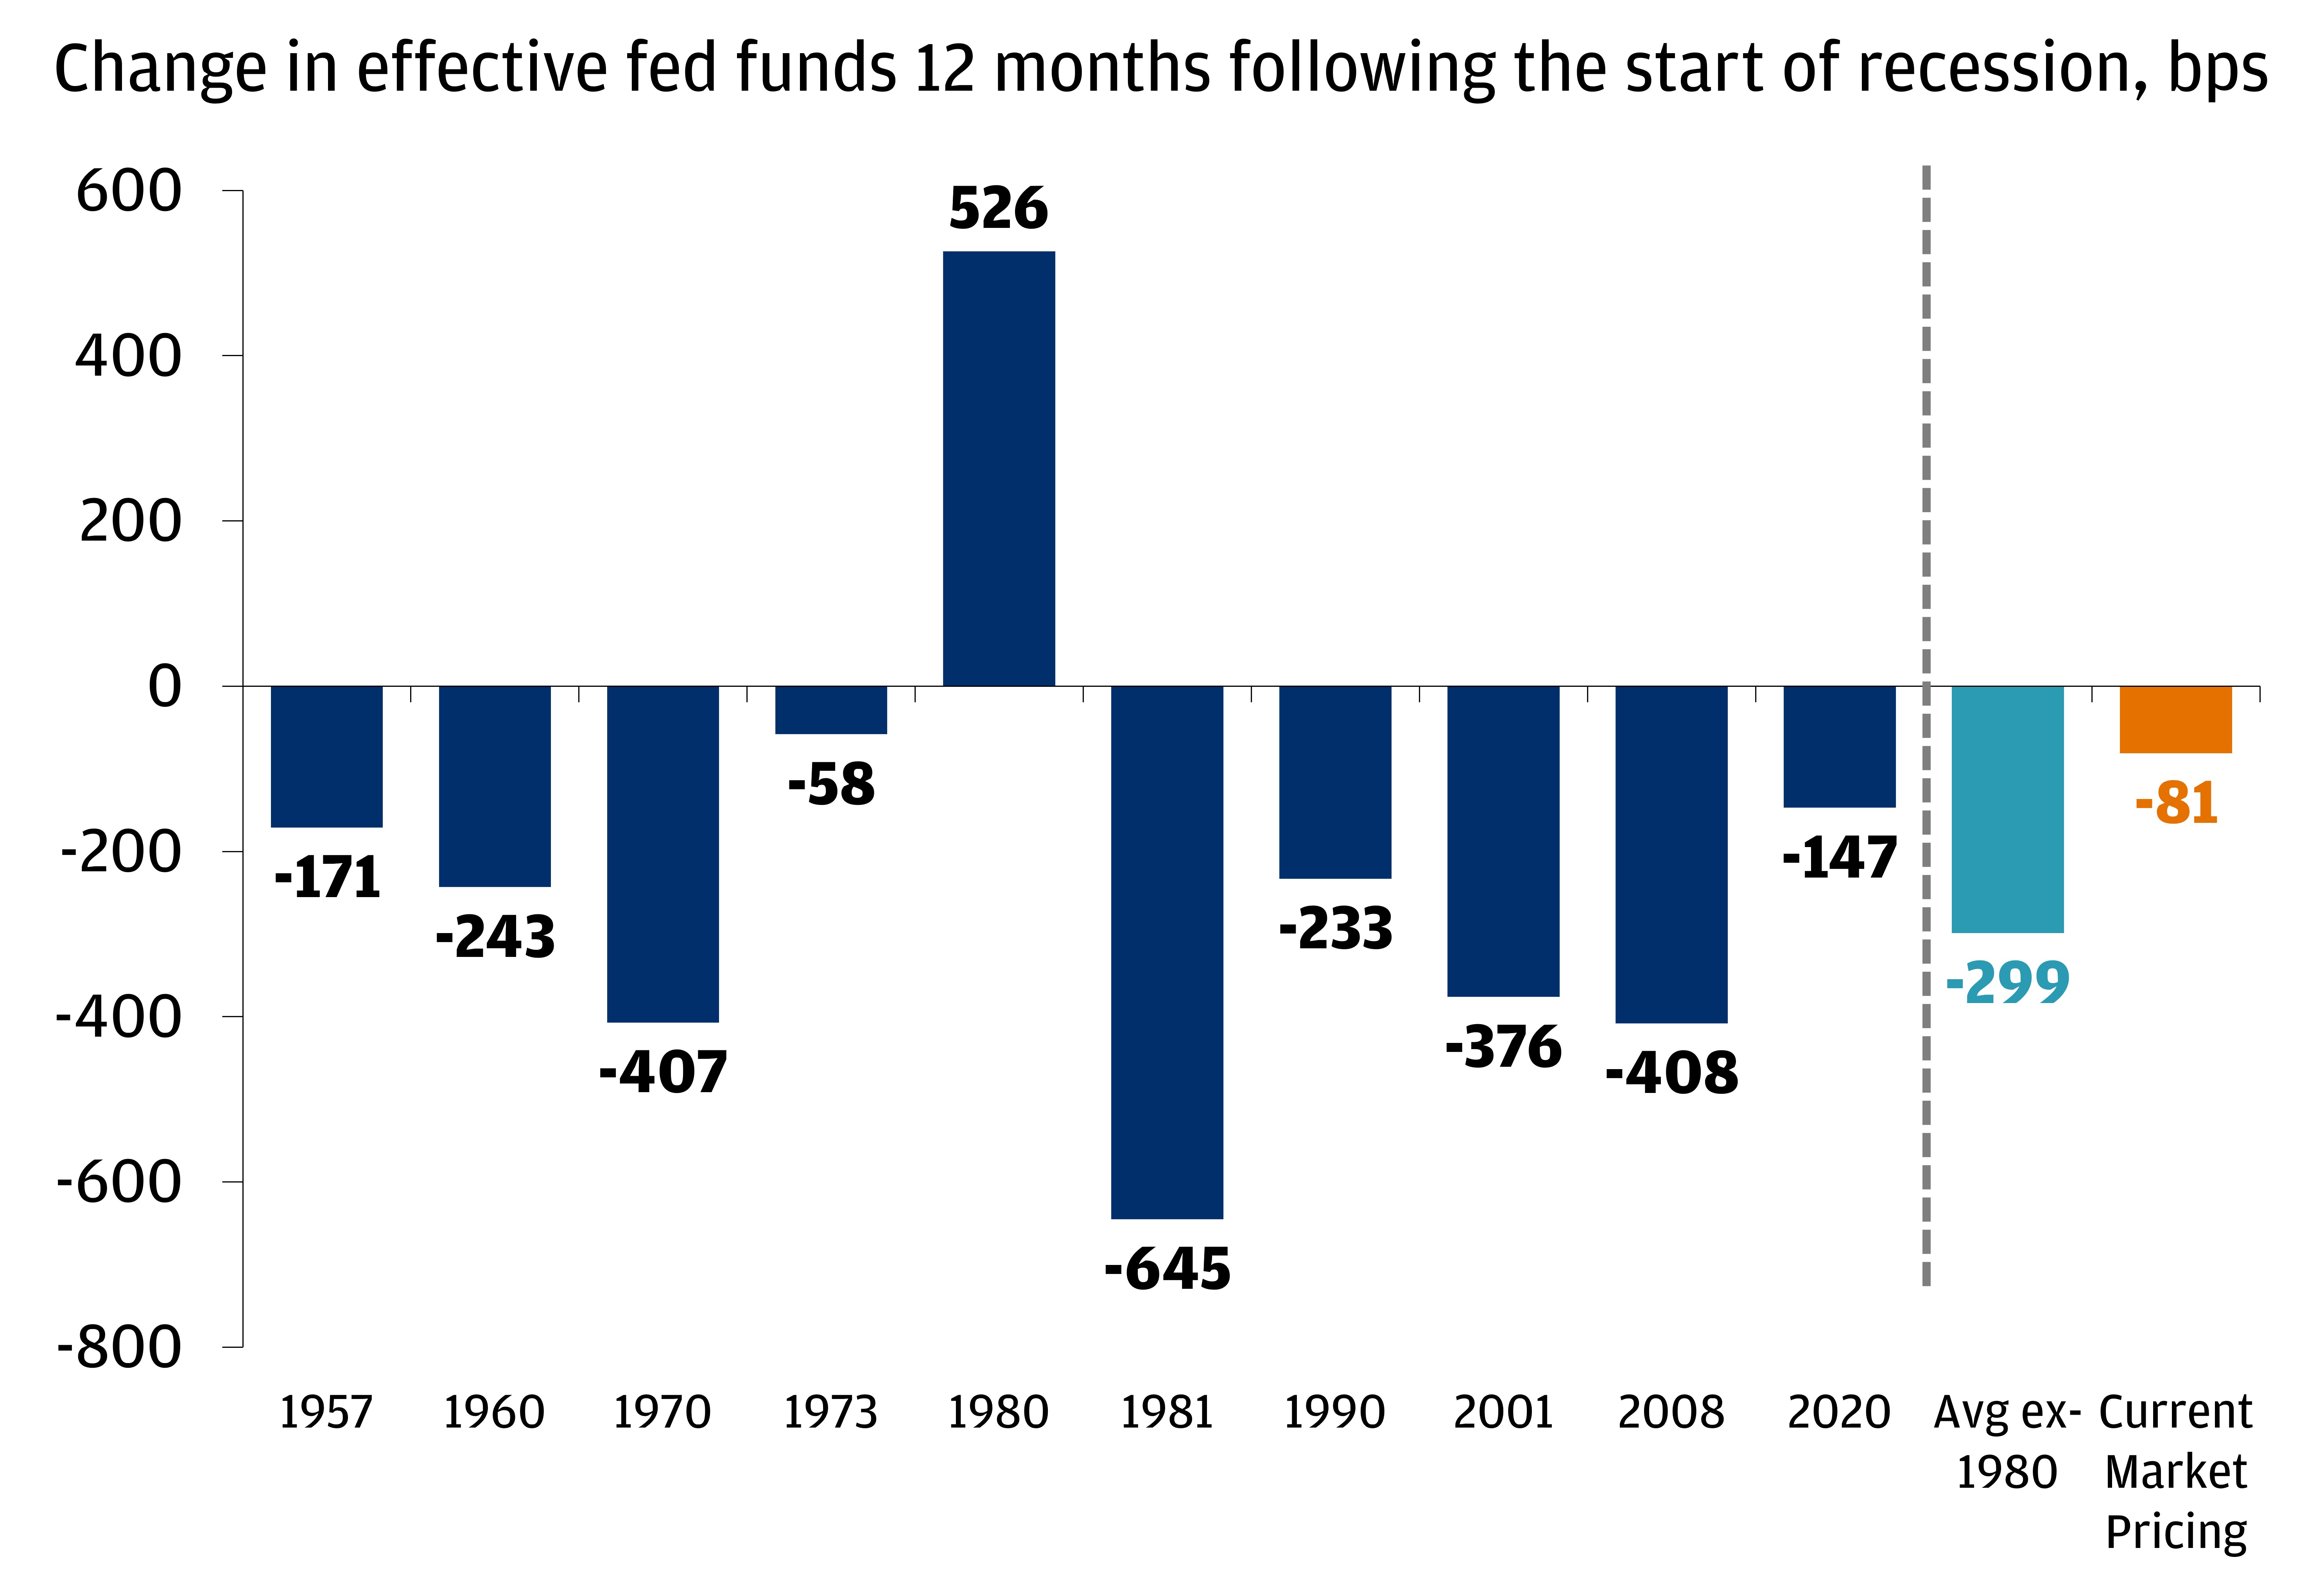 The chart describes the change (in basis points) in the effective fed funds rate 12 months following the start of recession.